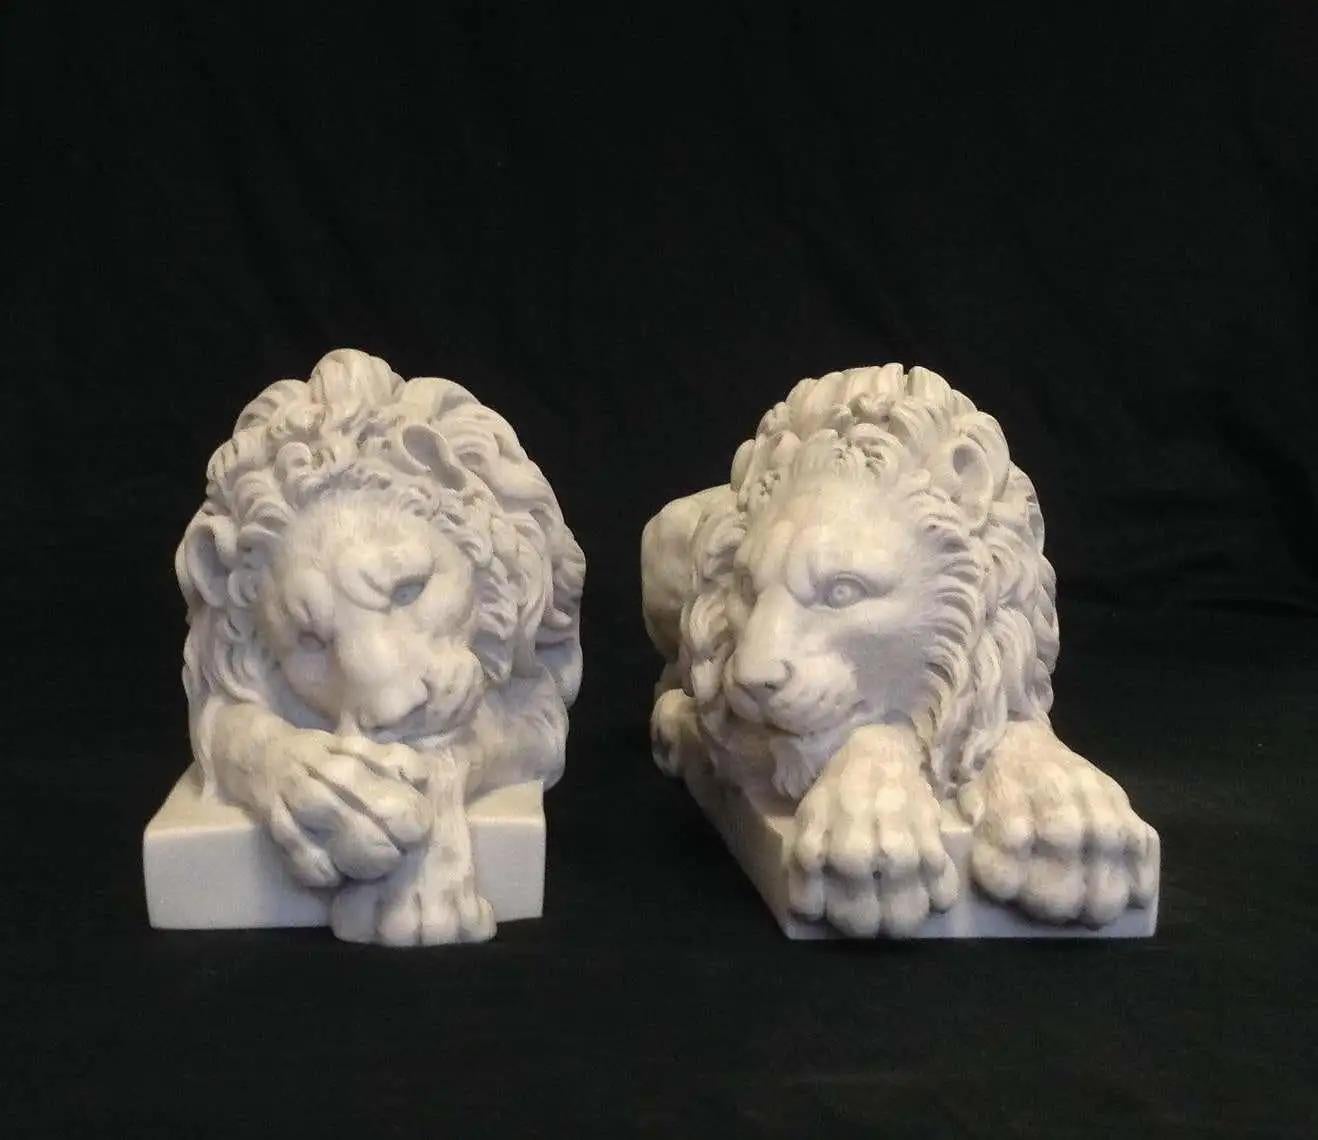 A stunning Chatsworth marble lions pair, 20th century.
The Chatsworth lions, a pair.


The famous marble Lions were originally made by the sculptor Antonio Canova for the Rezzonico monument in St. Peters, Rome.

They were then commissioned by